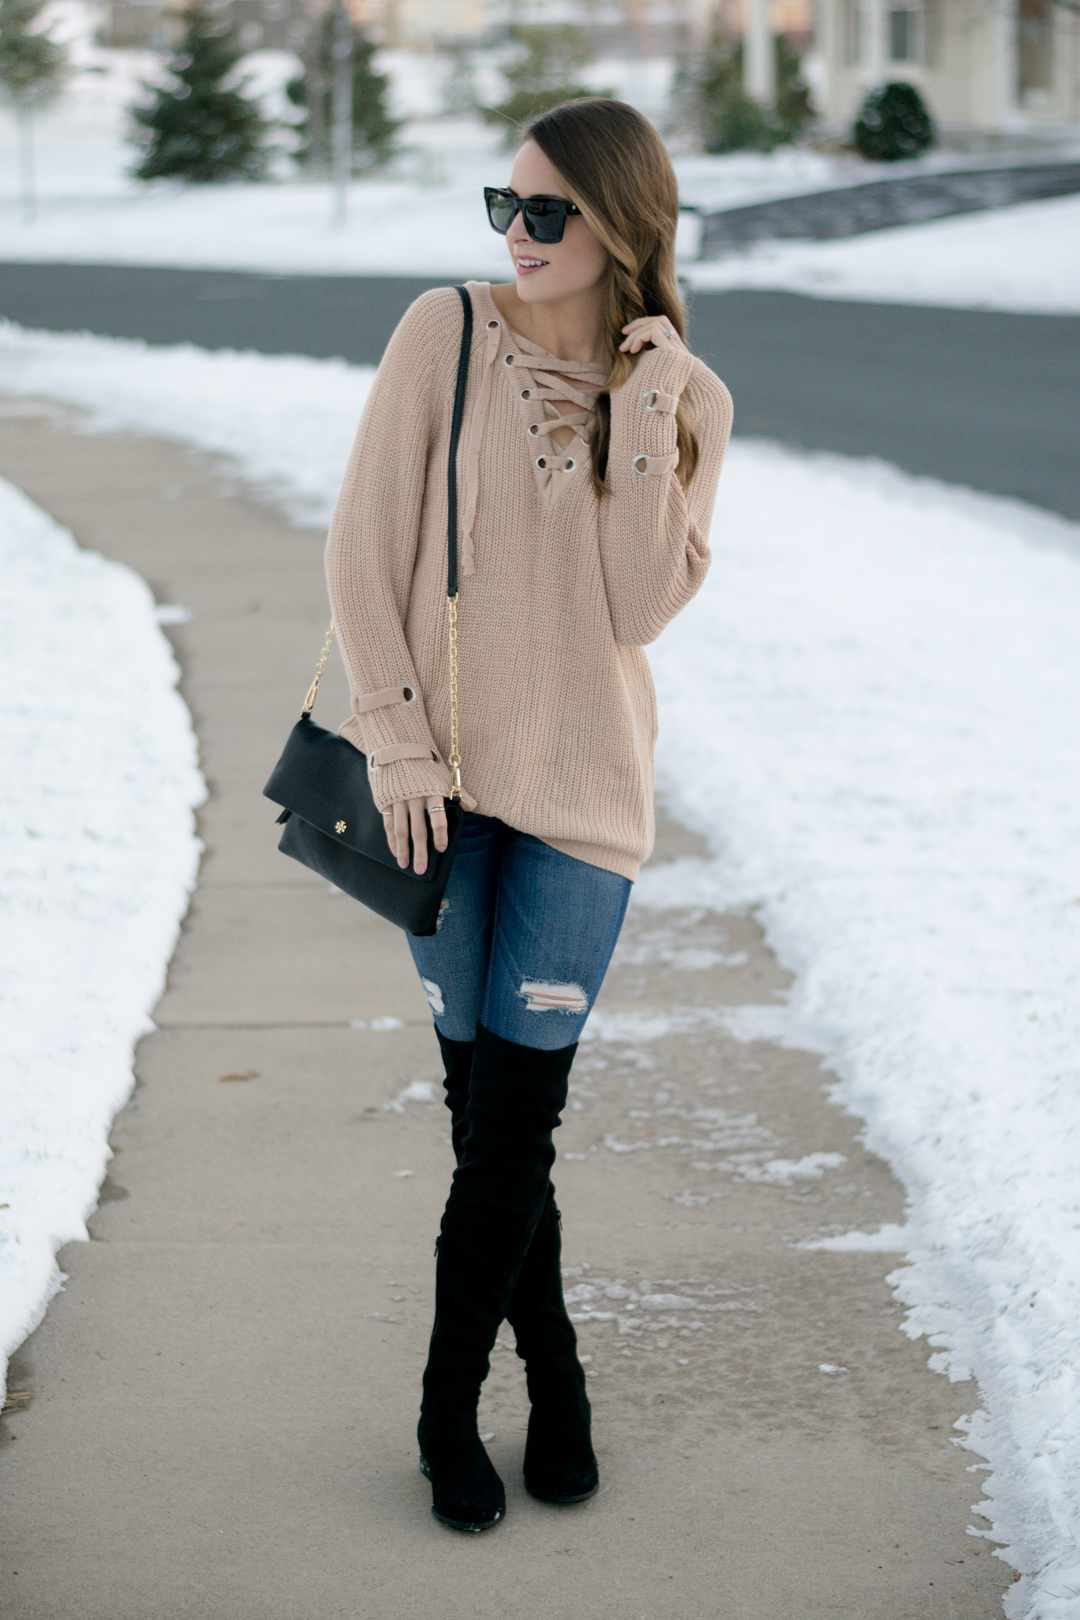 sweater and booties outfit